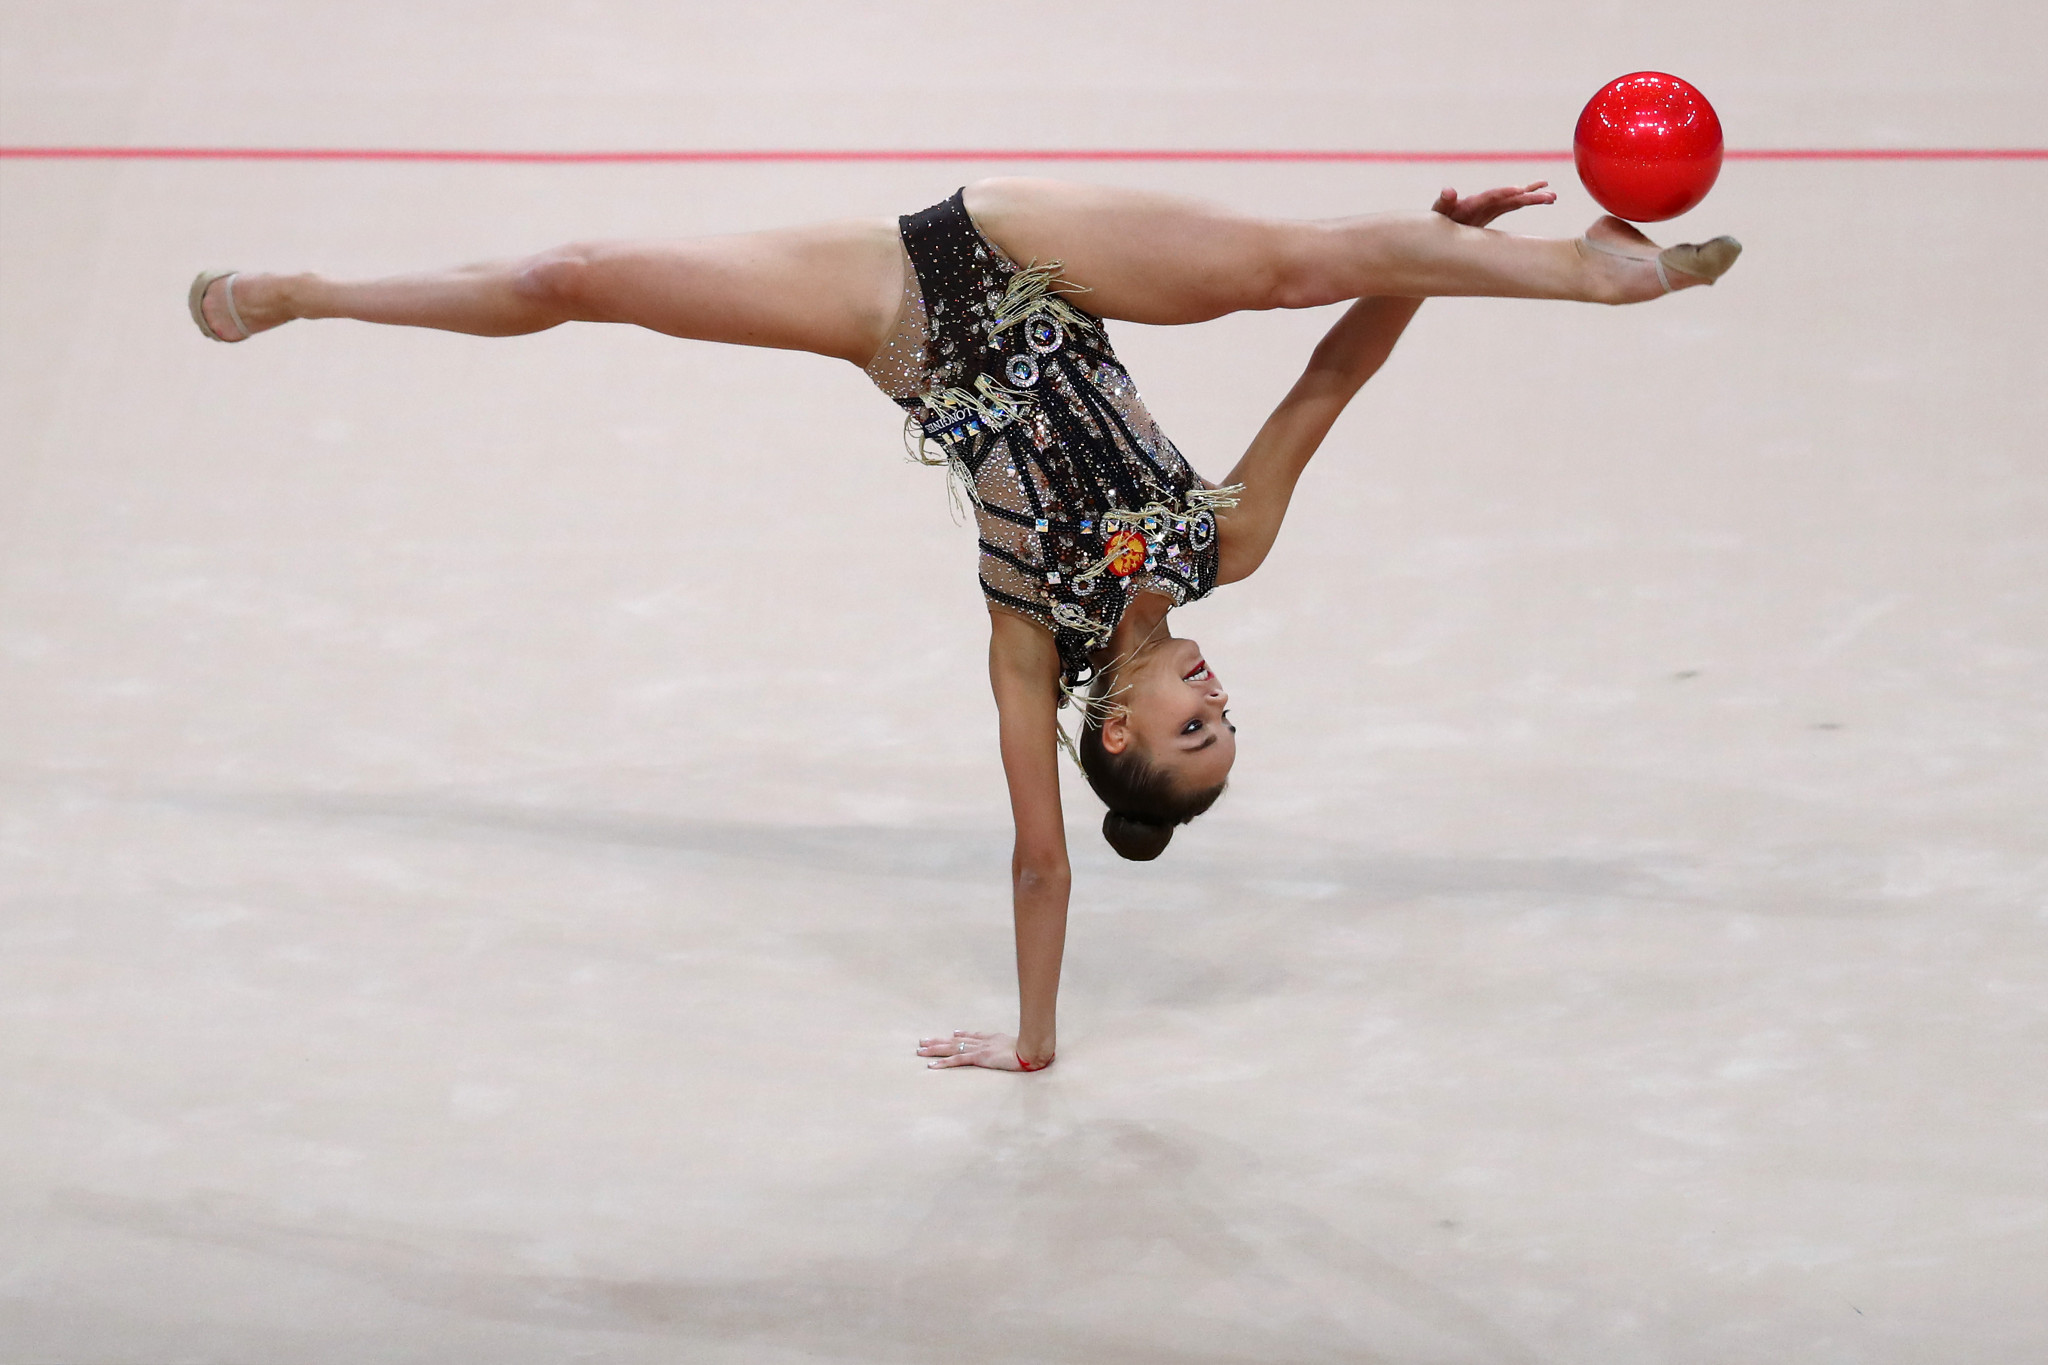 Russia's Dina Averina claimed a third consecutive all-around title at the Rhythmic Gymnastics World Championships in Baku ©Getty Images